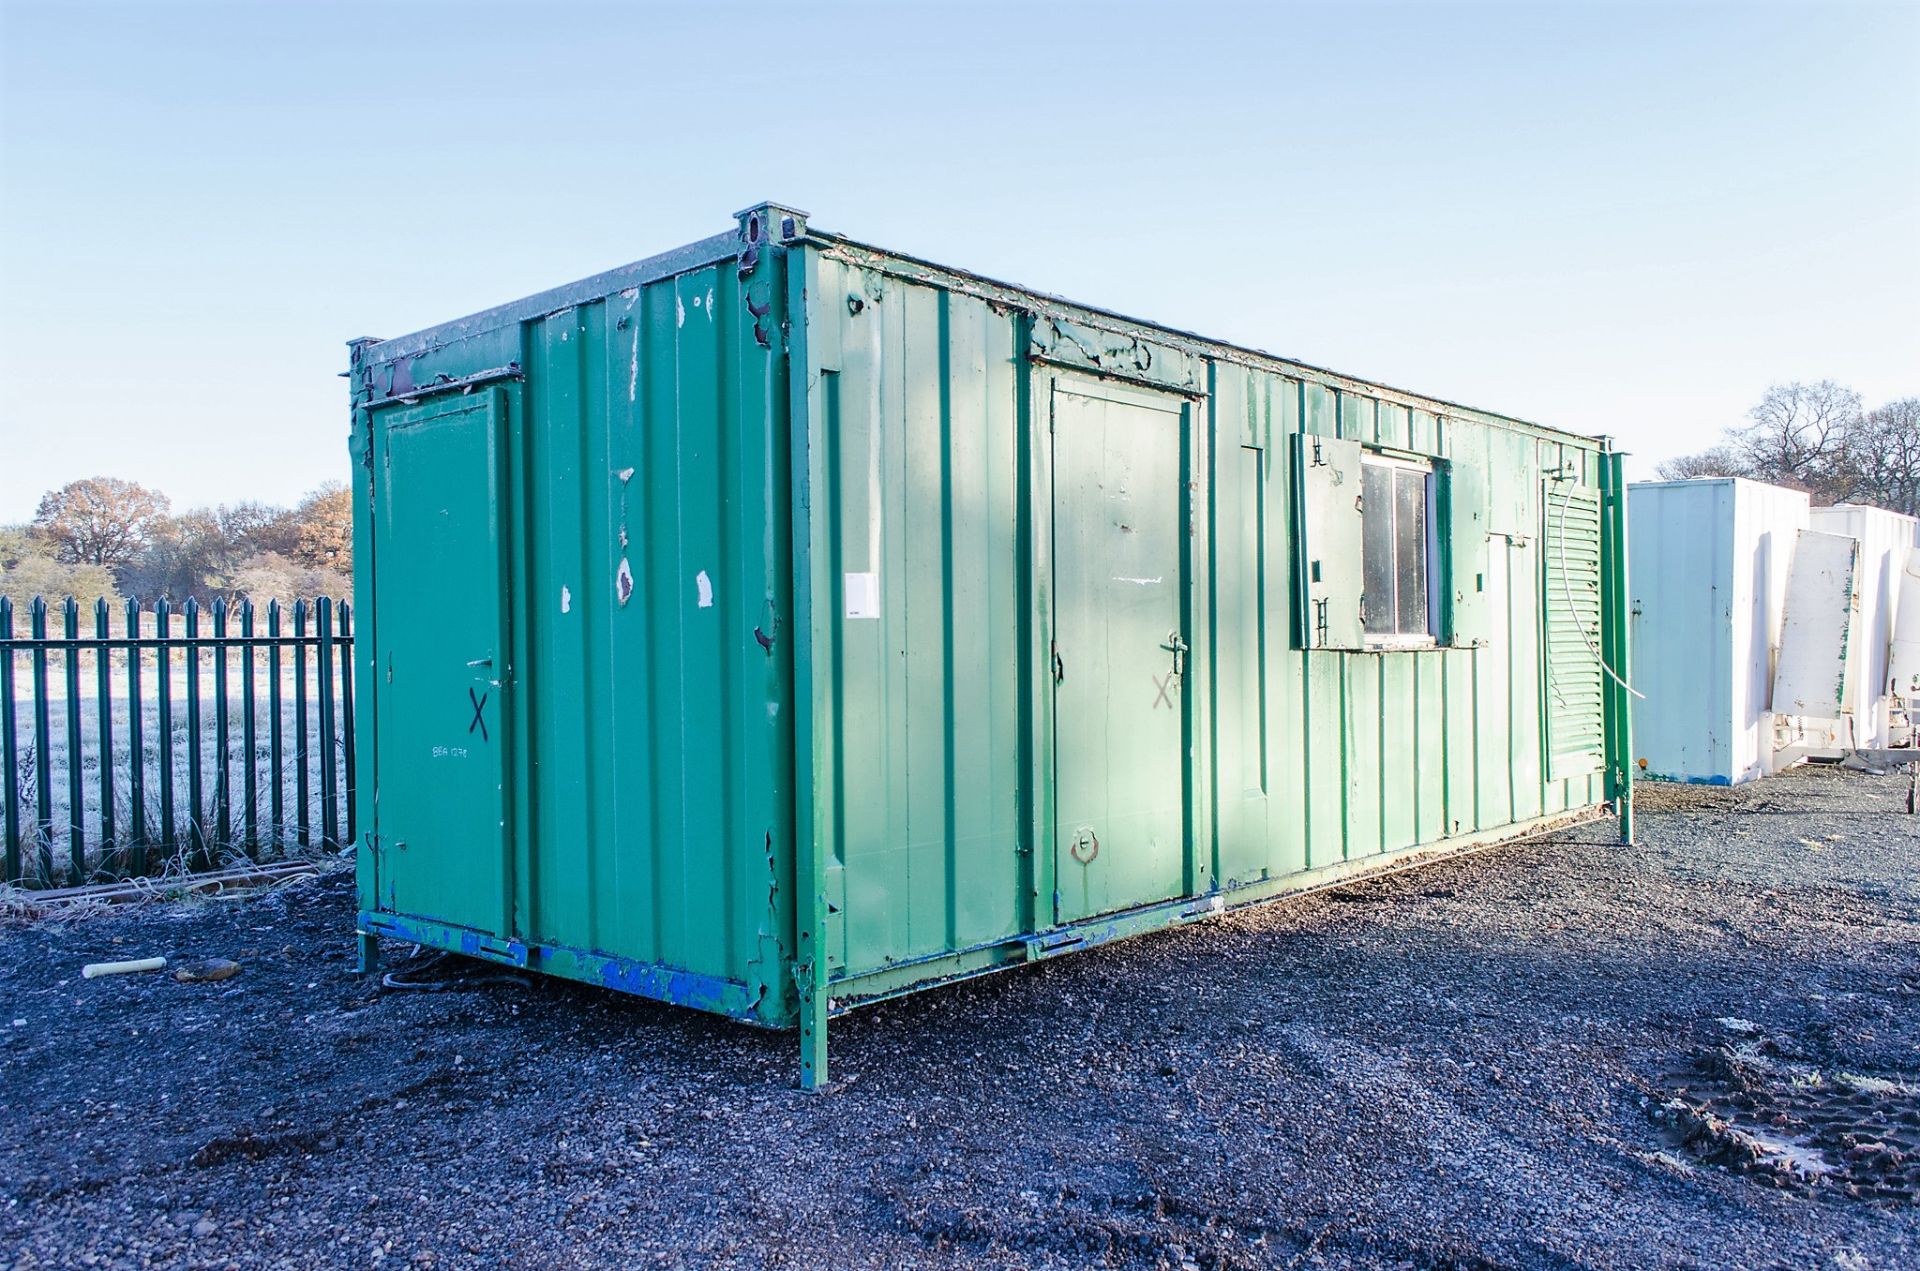 24' x 9' anti vandal steel welfare unit comprising; generator room, canteen area, drying room and